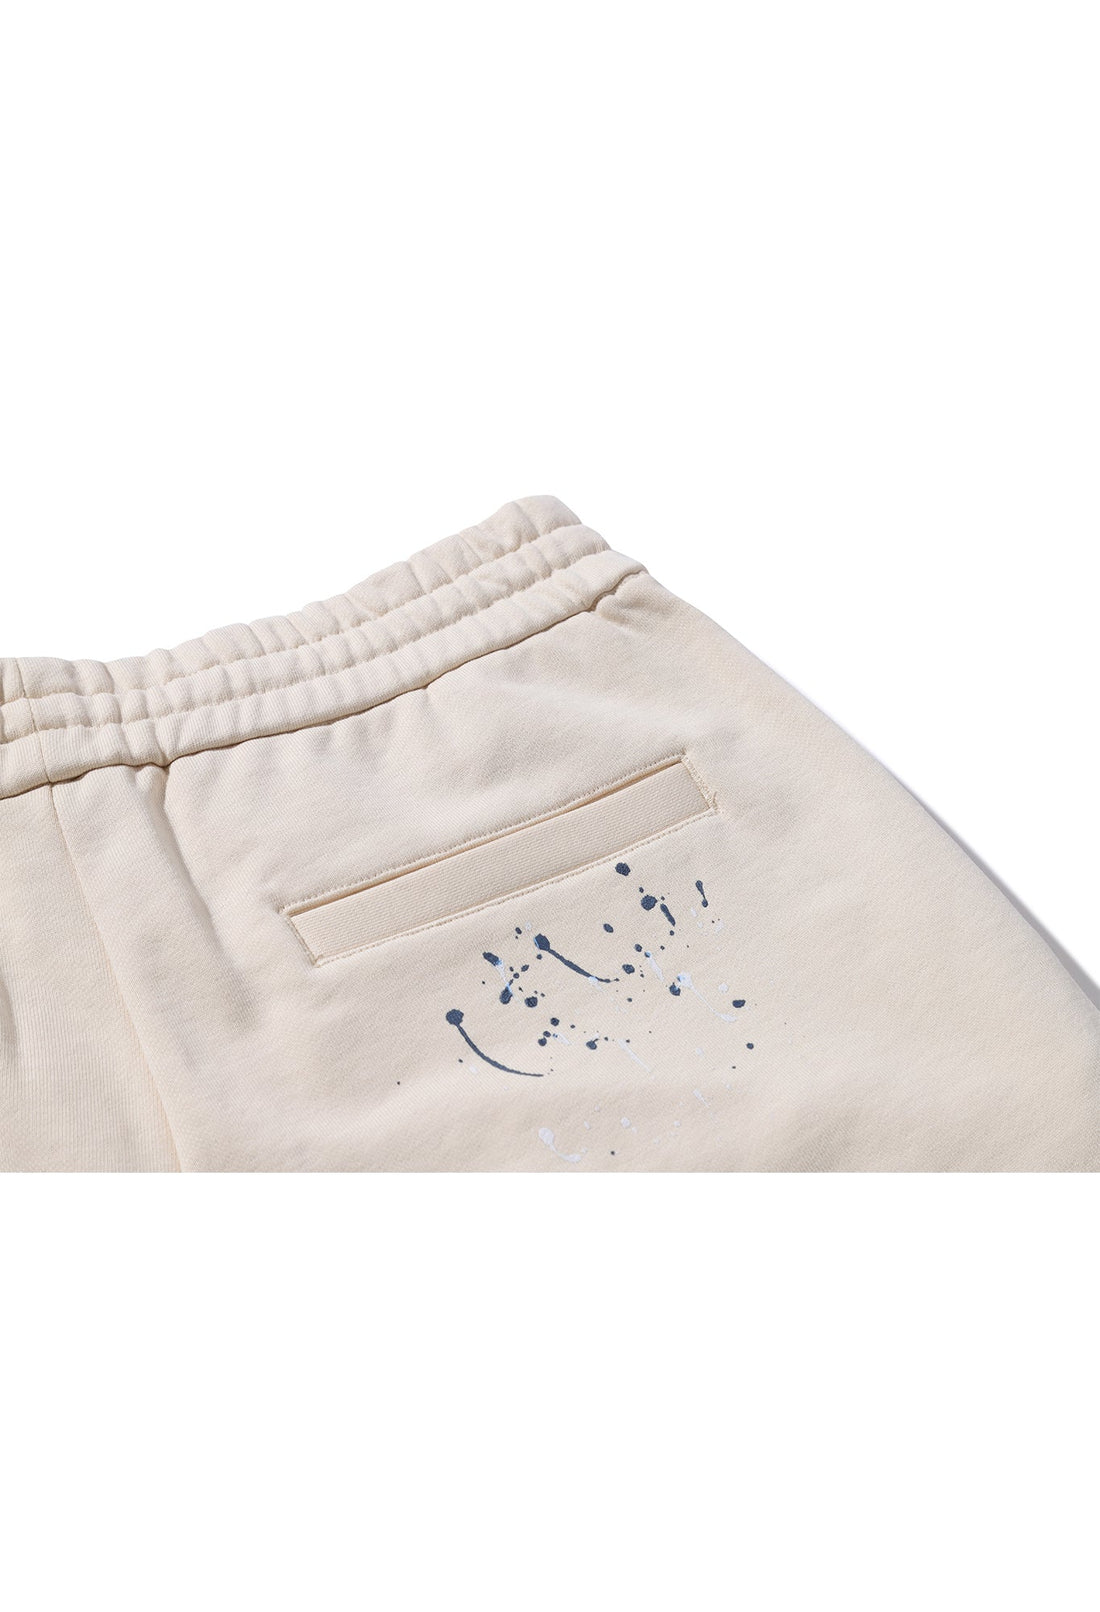 POLKA DOTS PANTS CREAM Acupuncture